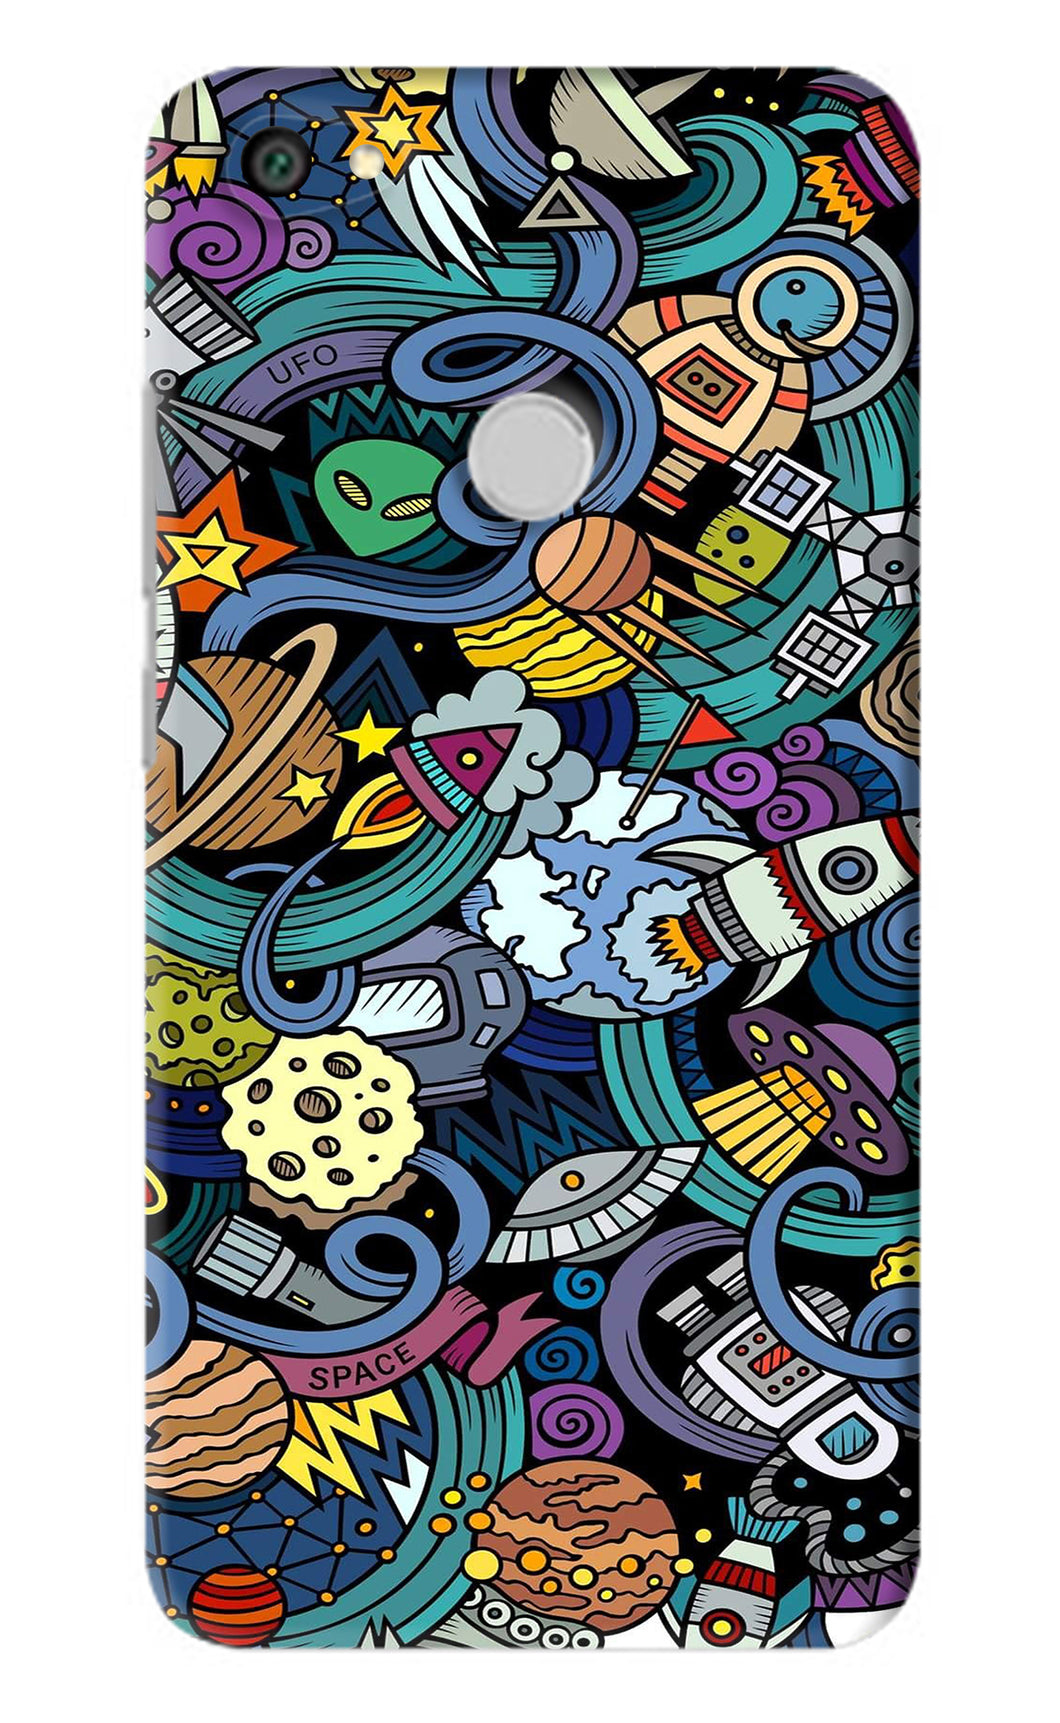 Space Abstract Xiaomi Redmi Y1 Back Skin Wrap